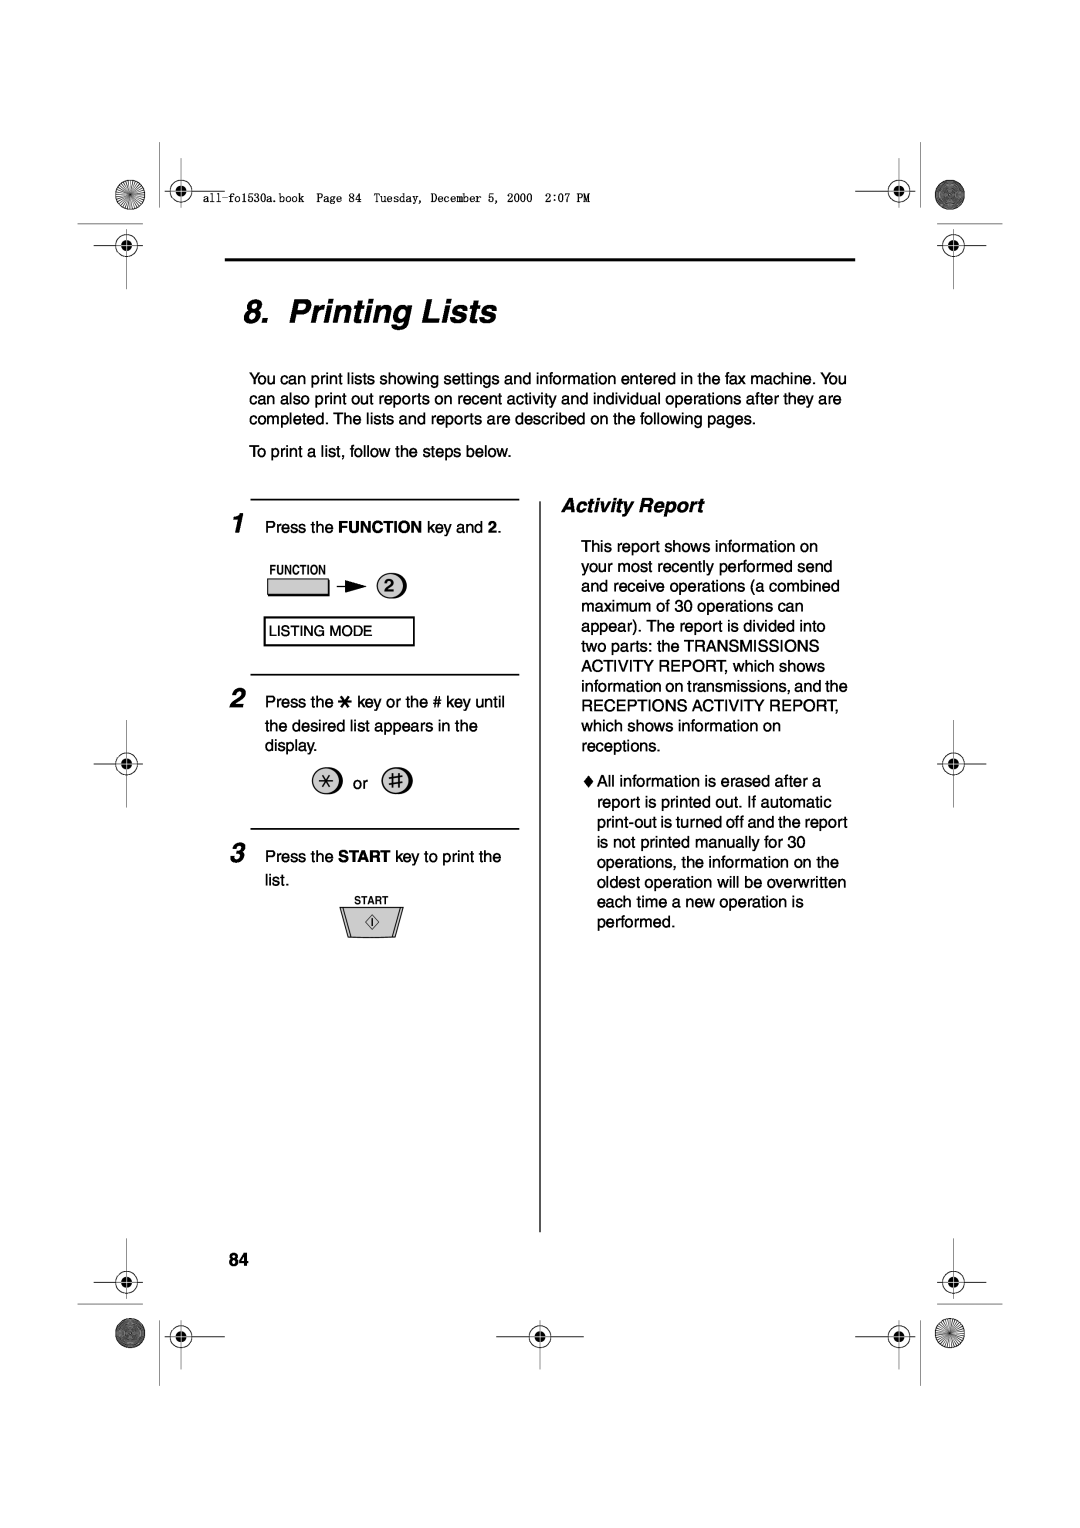 Sharp FO-1530 operation manual Printing Lists, Activity Report 